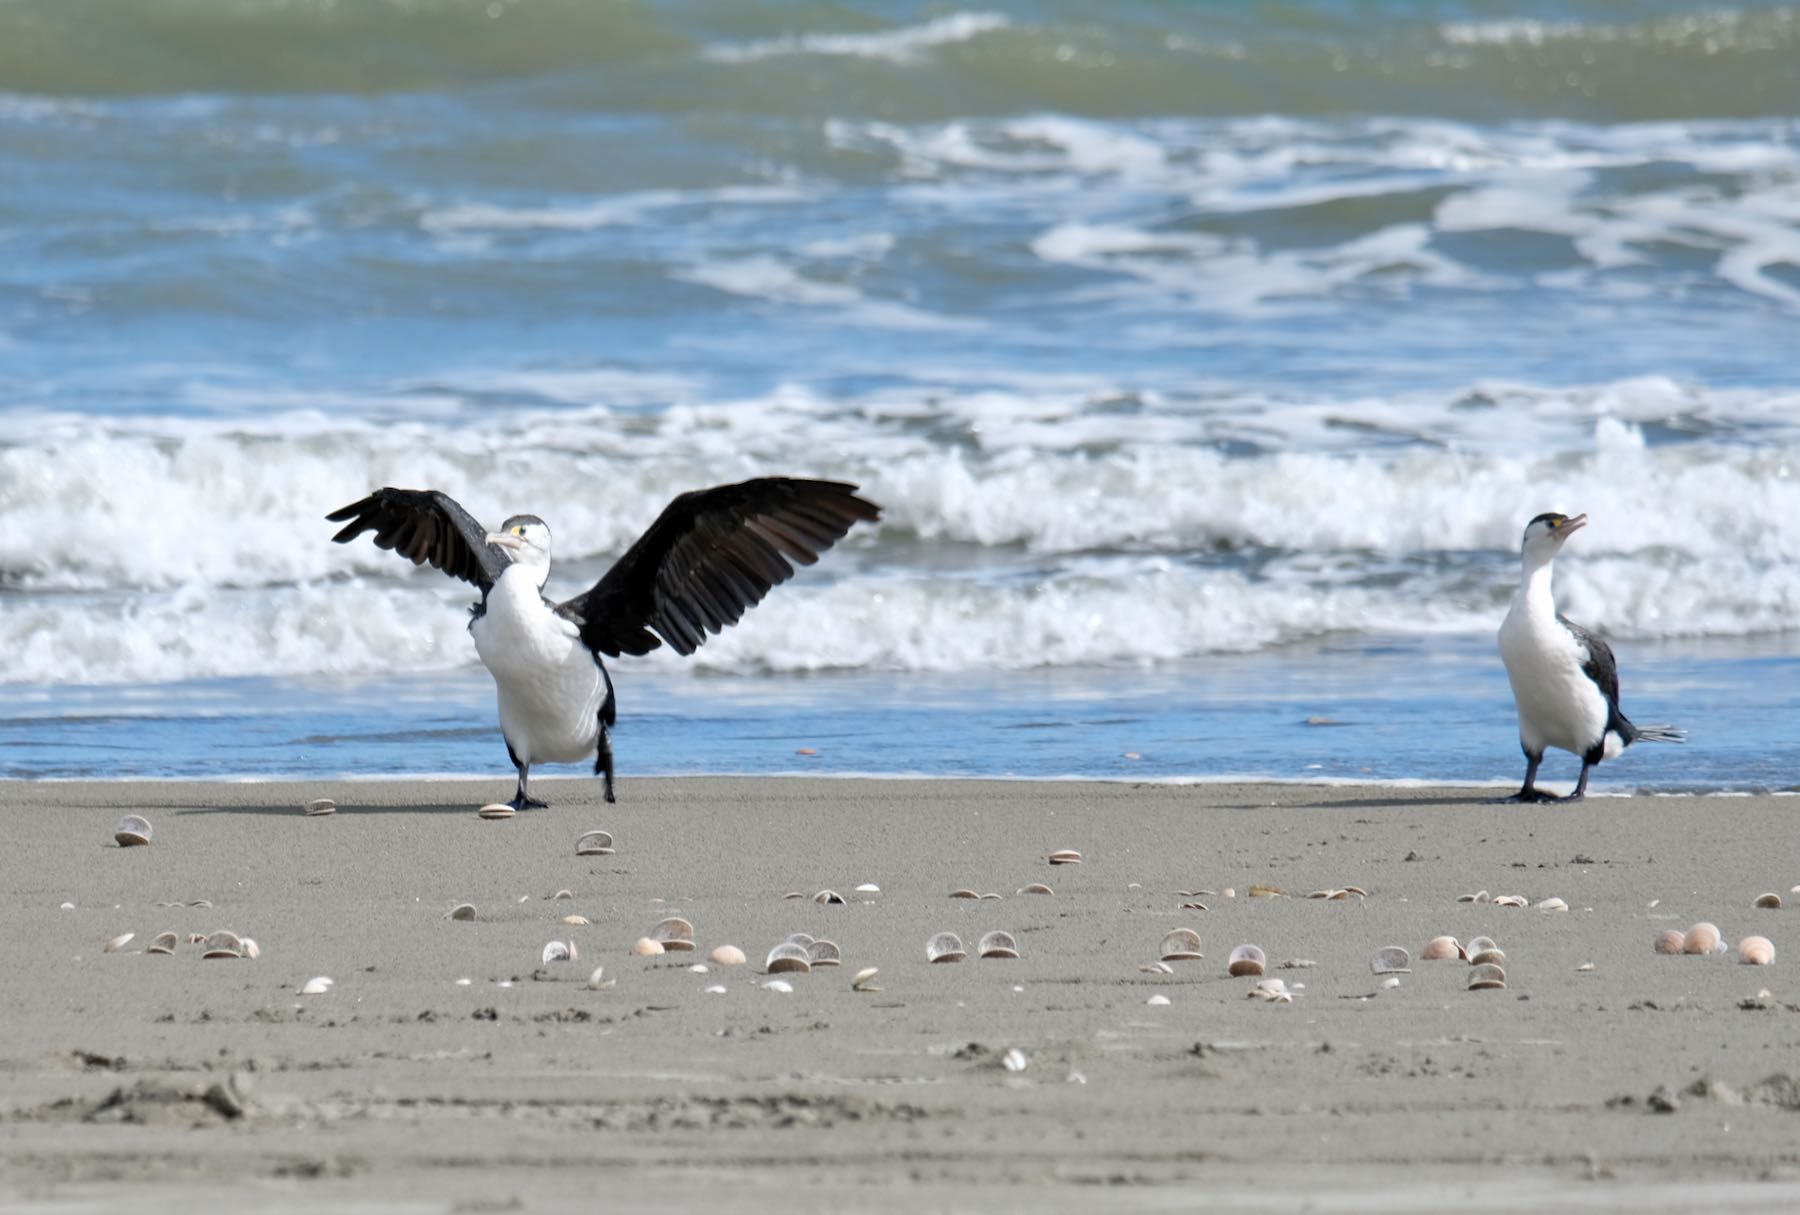 Two large black and white birds on the shore, one with wings spread. 